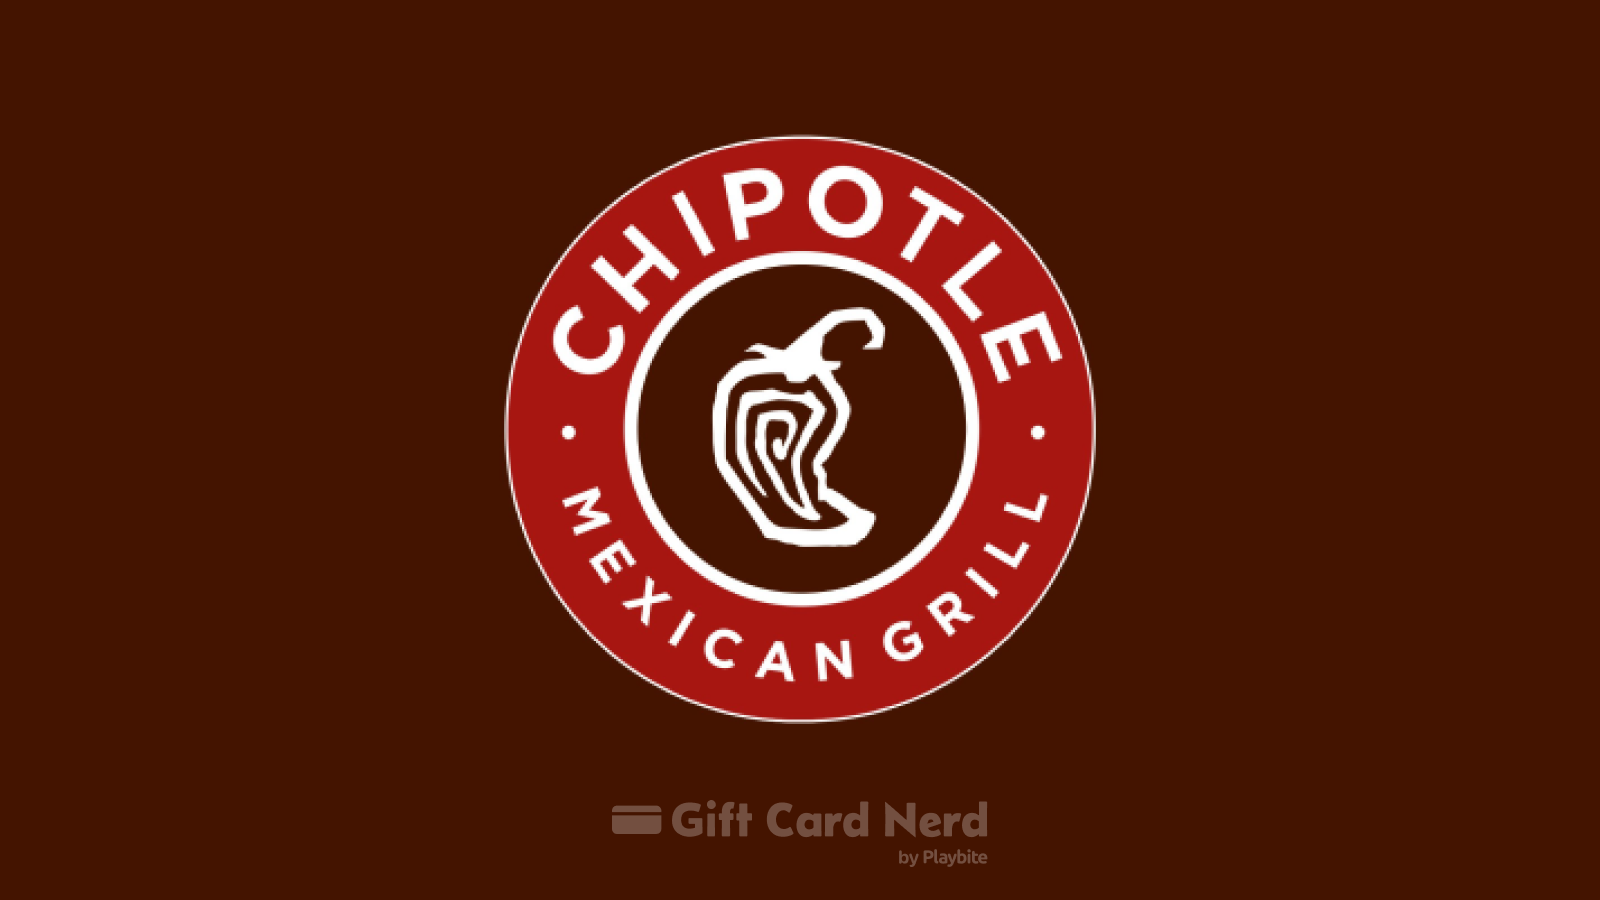 Can You Use a Chipotle Gift Card on Amazon?